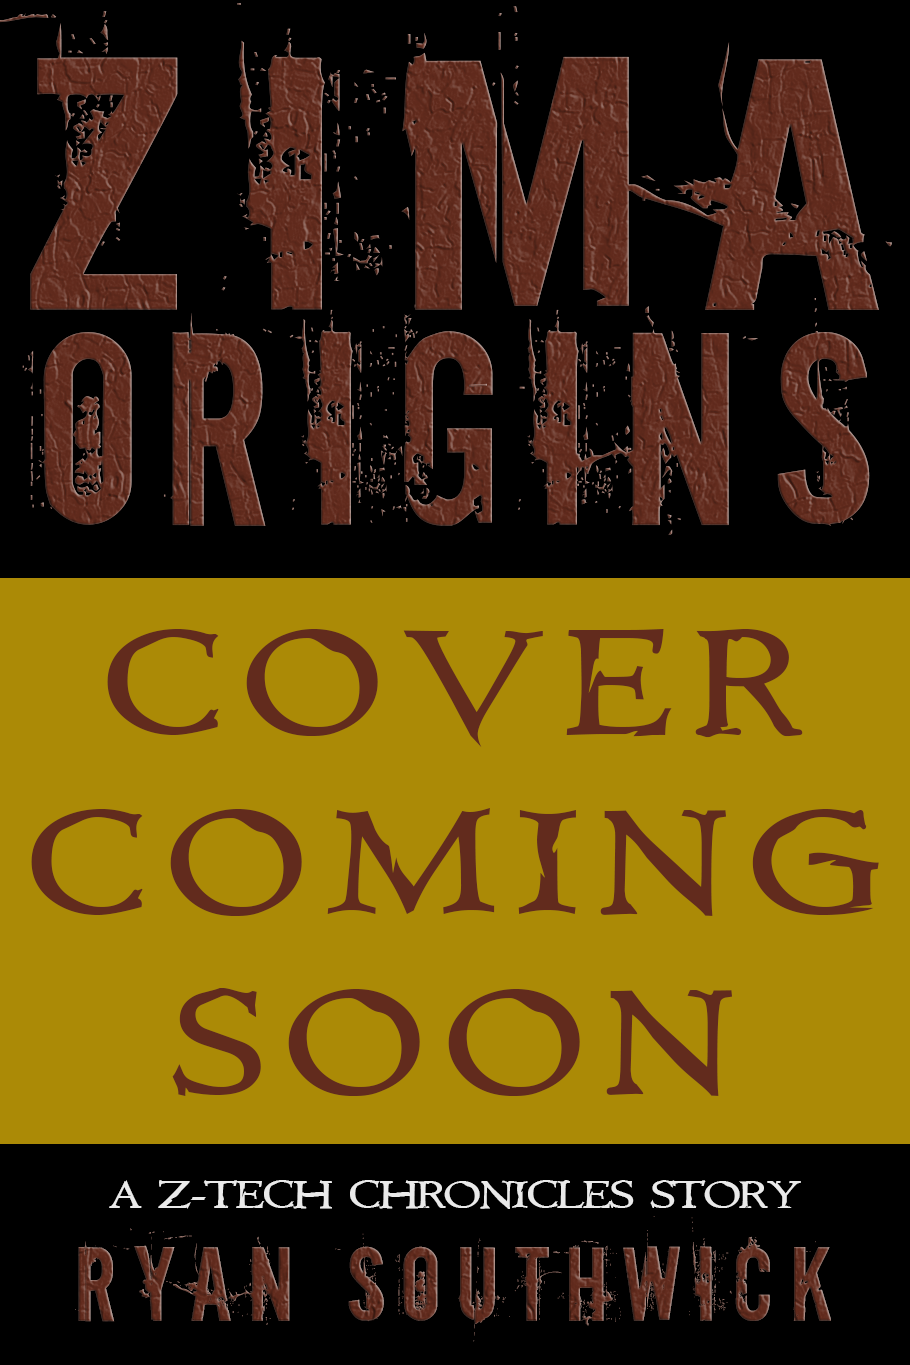 Book cover: Zima Origins by Ryan Southwick. "Cover coming soon."